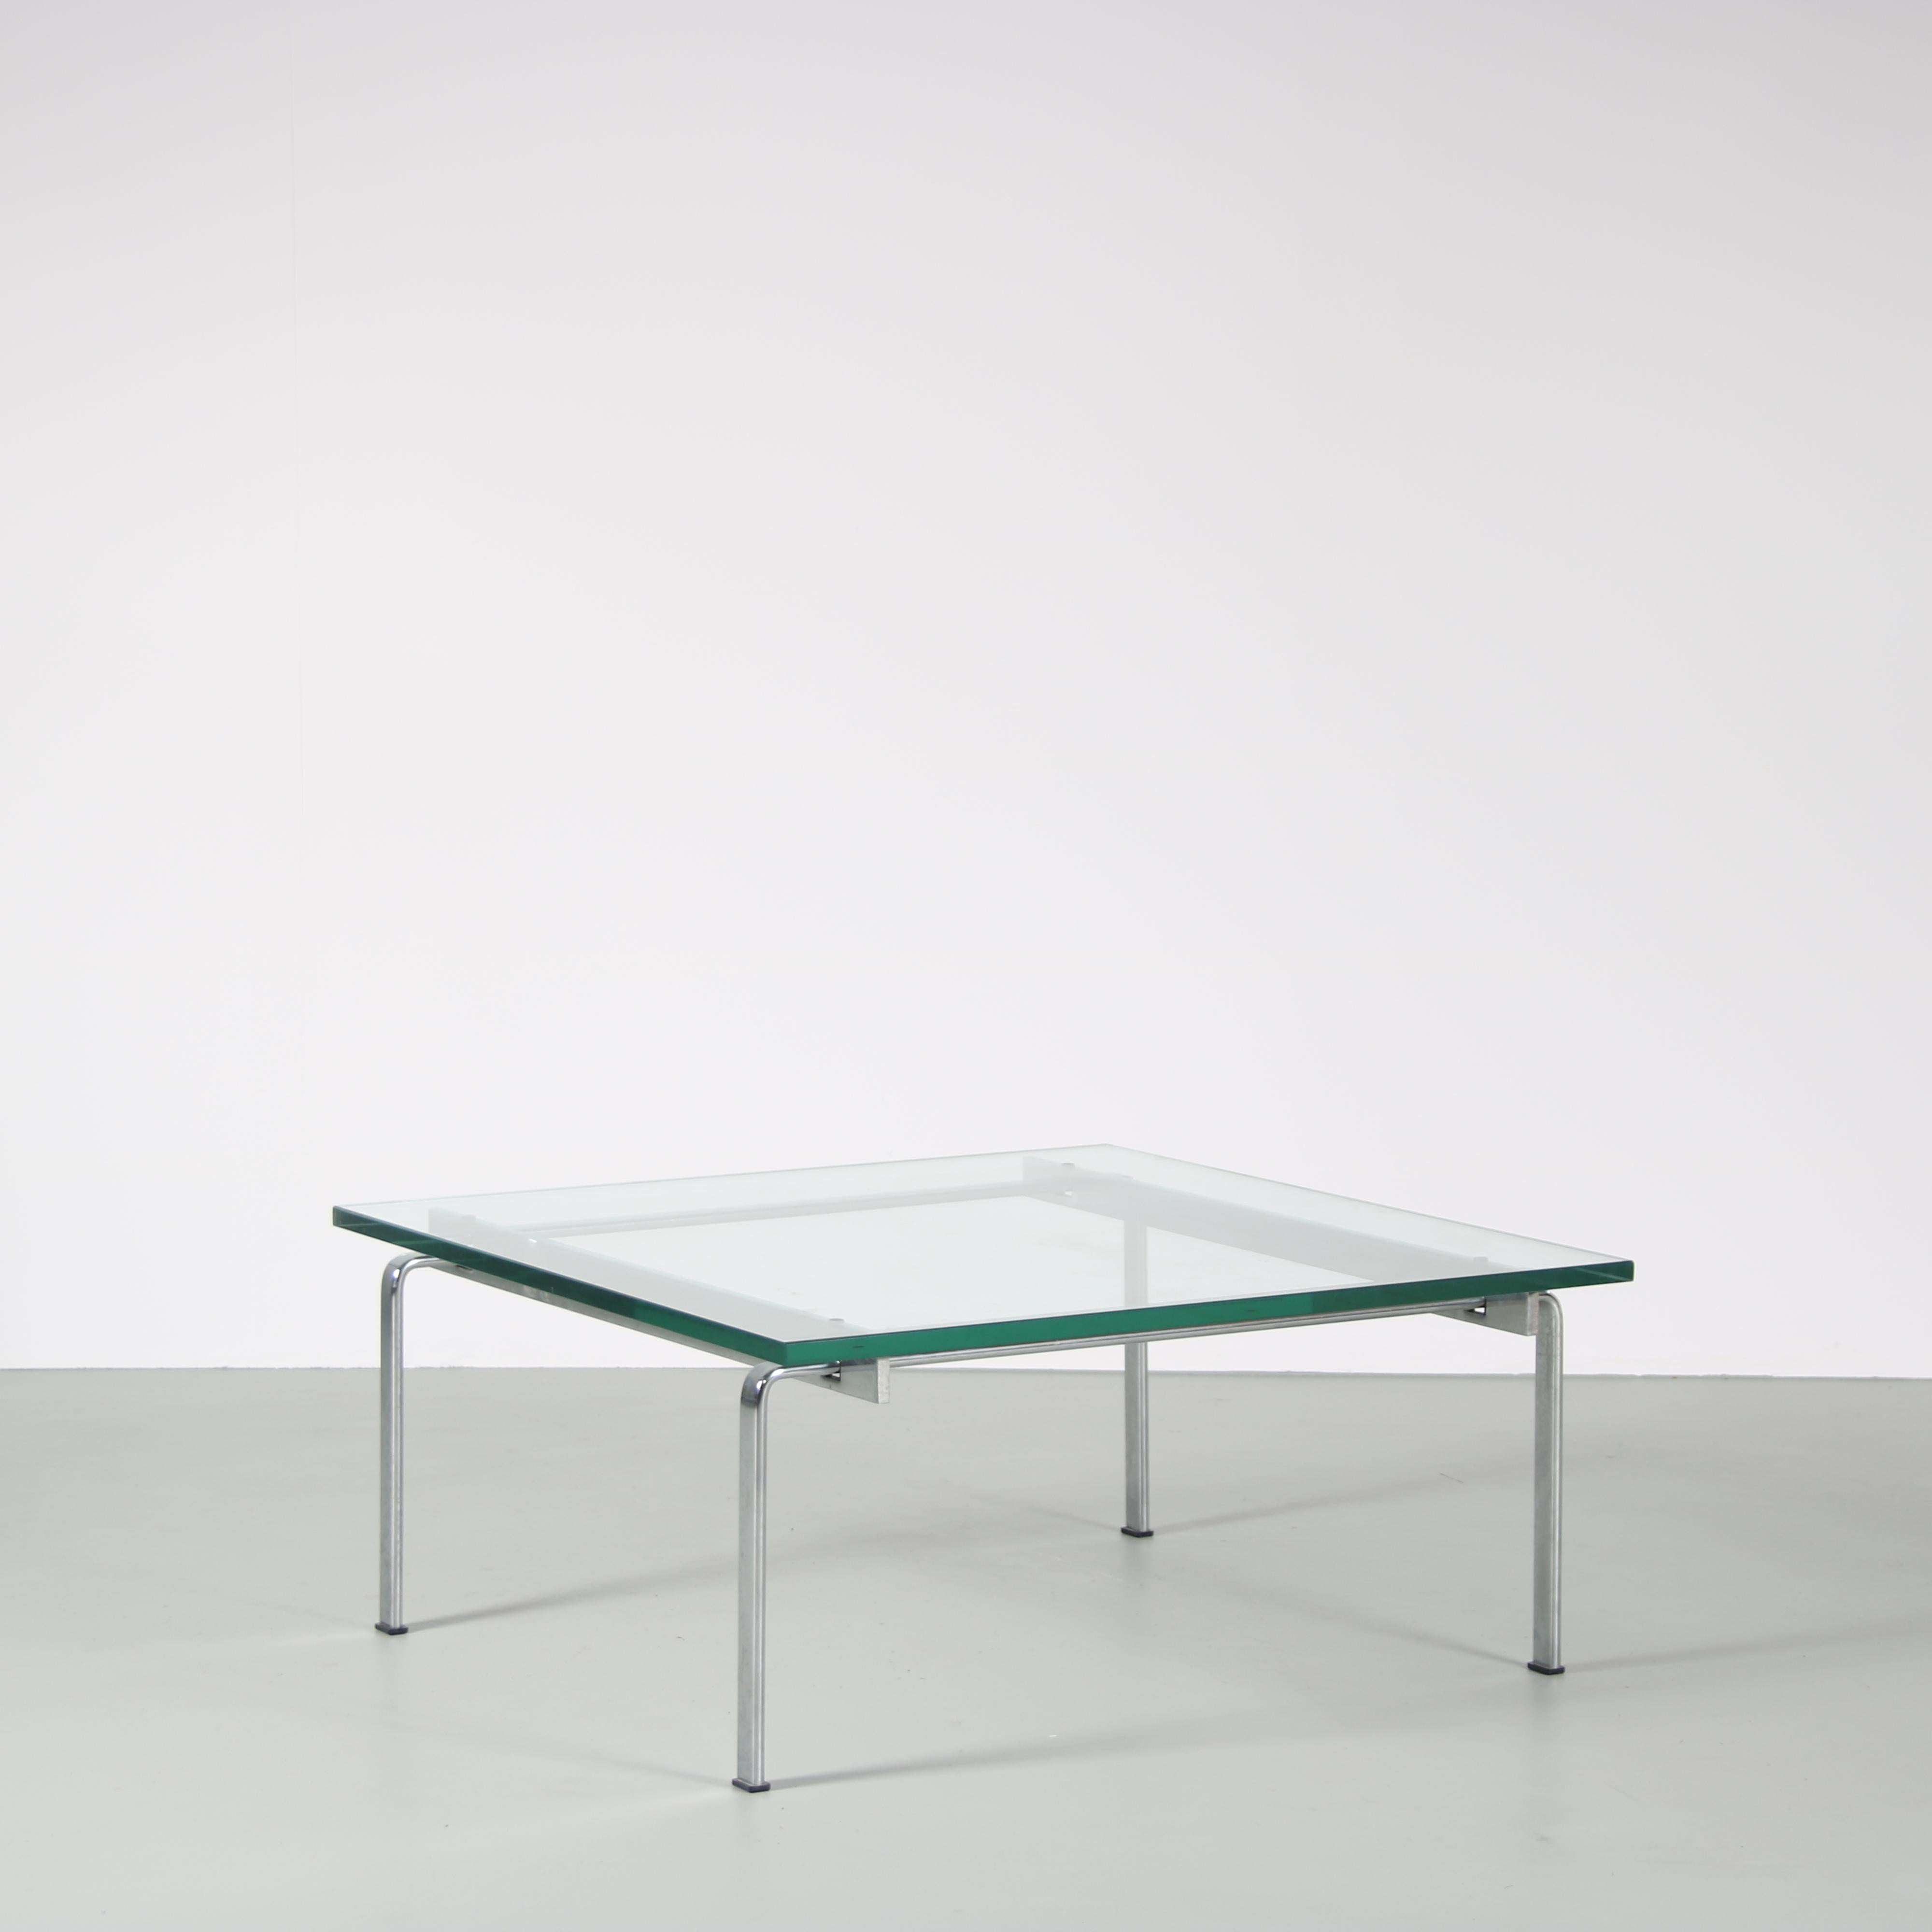 A beautiful coffee table, model FK90, designed by Preben Fabricius & Jorgen Kastholm, manufactured by Kill International in Germany around 1960.

This high quality piece features a chrome plated metal base with a thick, square glass top. The metal